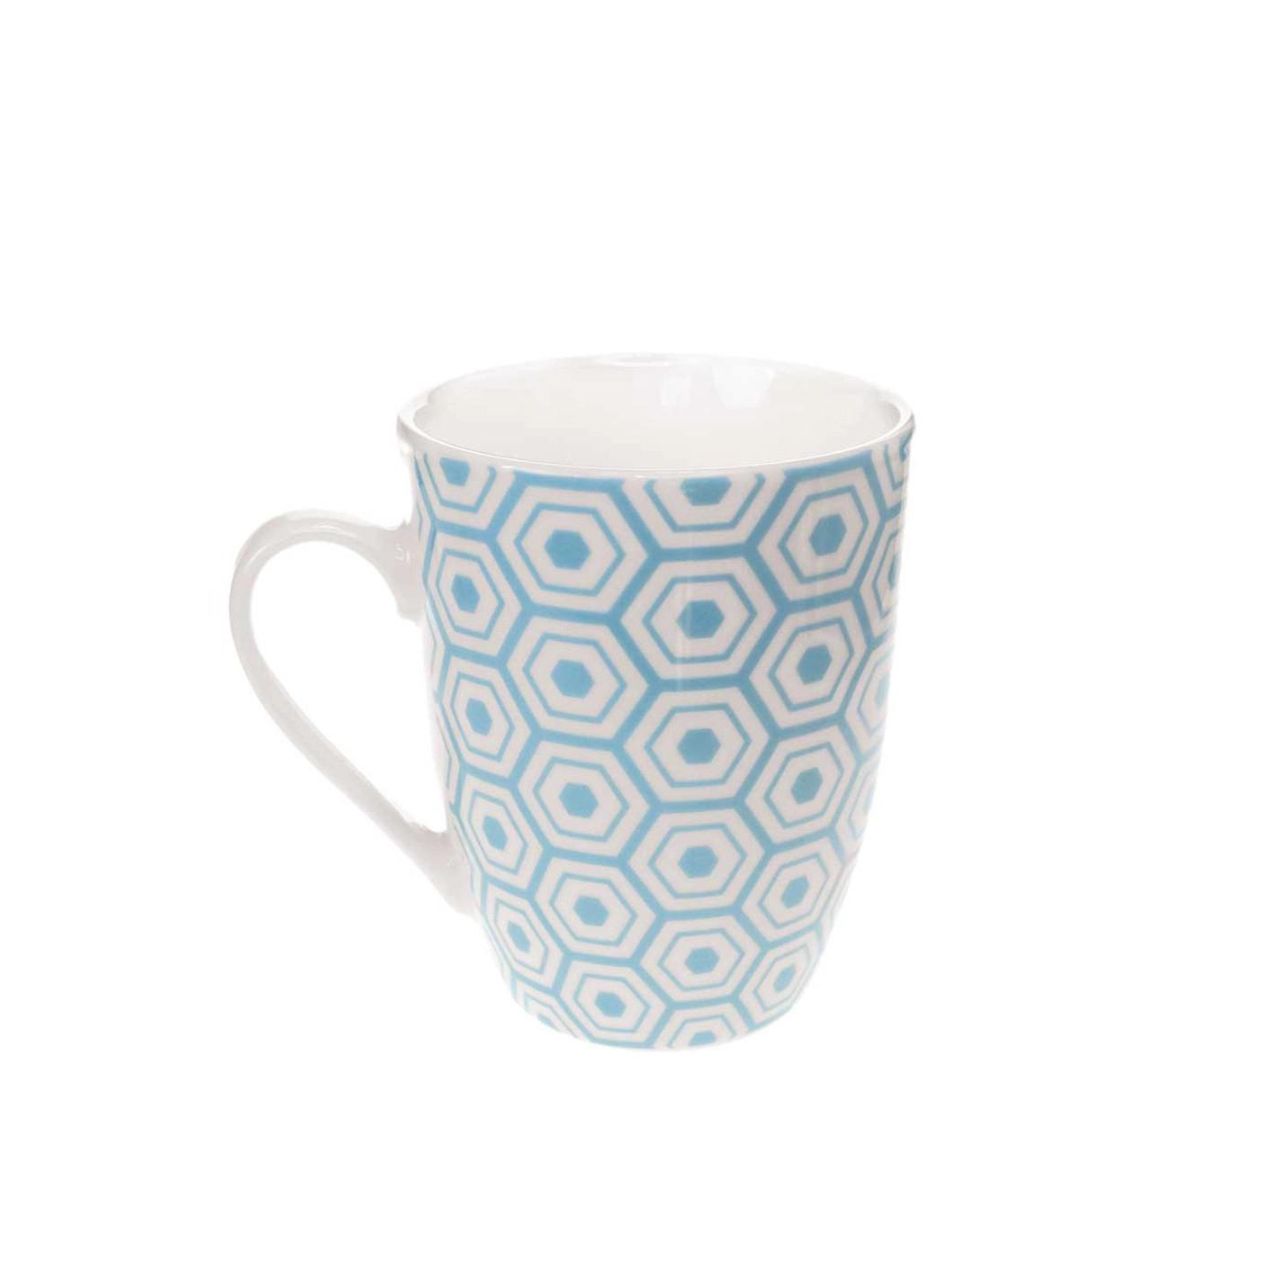 Tipperary Crystal Set Six Honeycomb Mugs Tipperary Crystal ceramics are made from bone china which gives the ceramic a clean, white finish. Stack crockery separately from other items such as cutlery, saucepans or glass. Over washing will cause the glaze to dull and the design to fade.